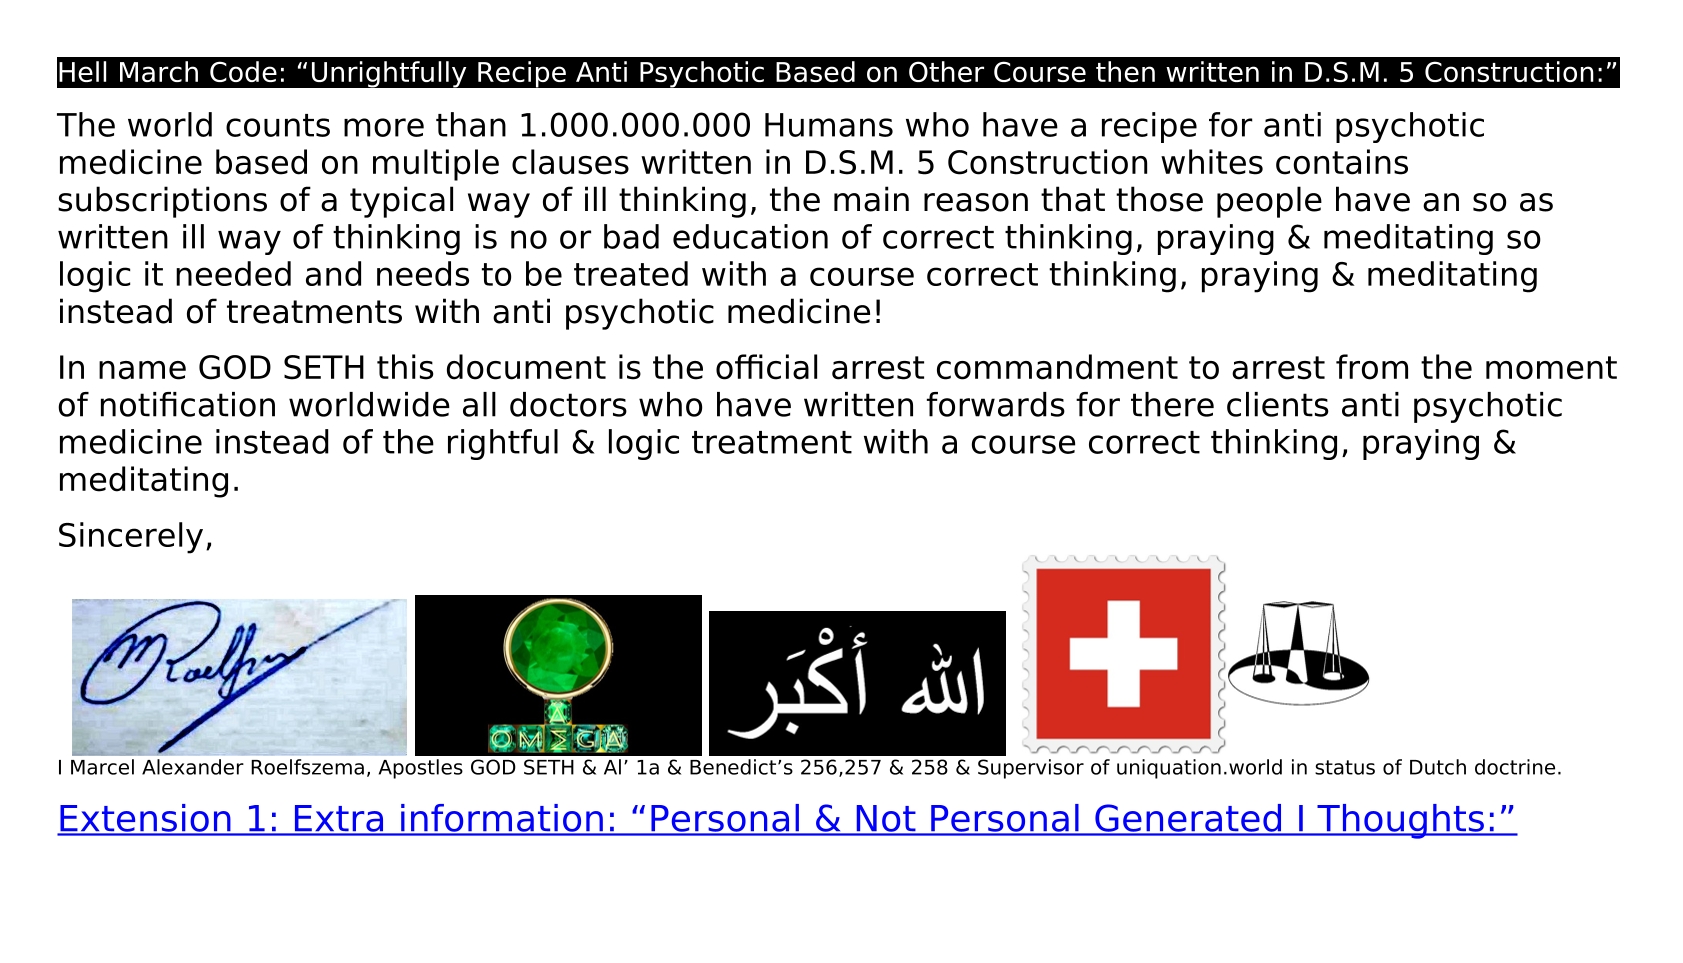 Hell March Code - Unrightfully Recipe Anti Psychotic Based on Other Course then written in D.S.M. 5 Construction